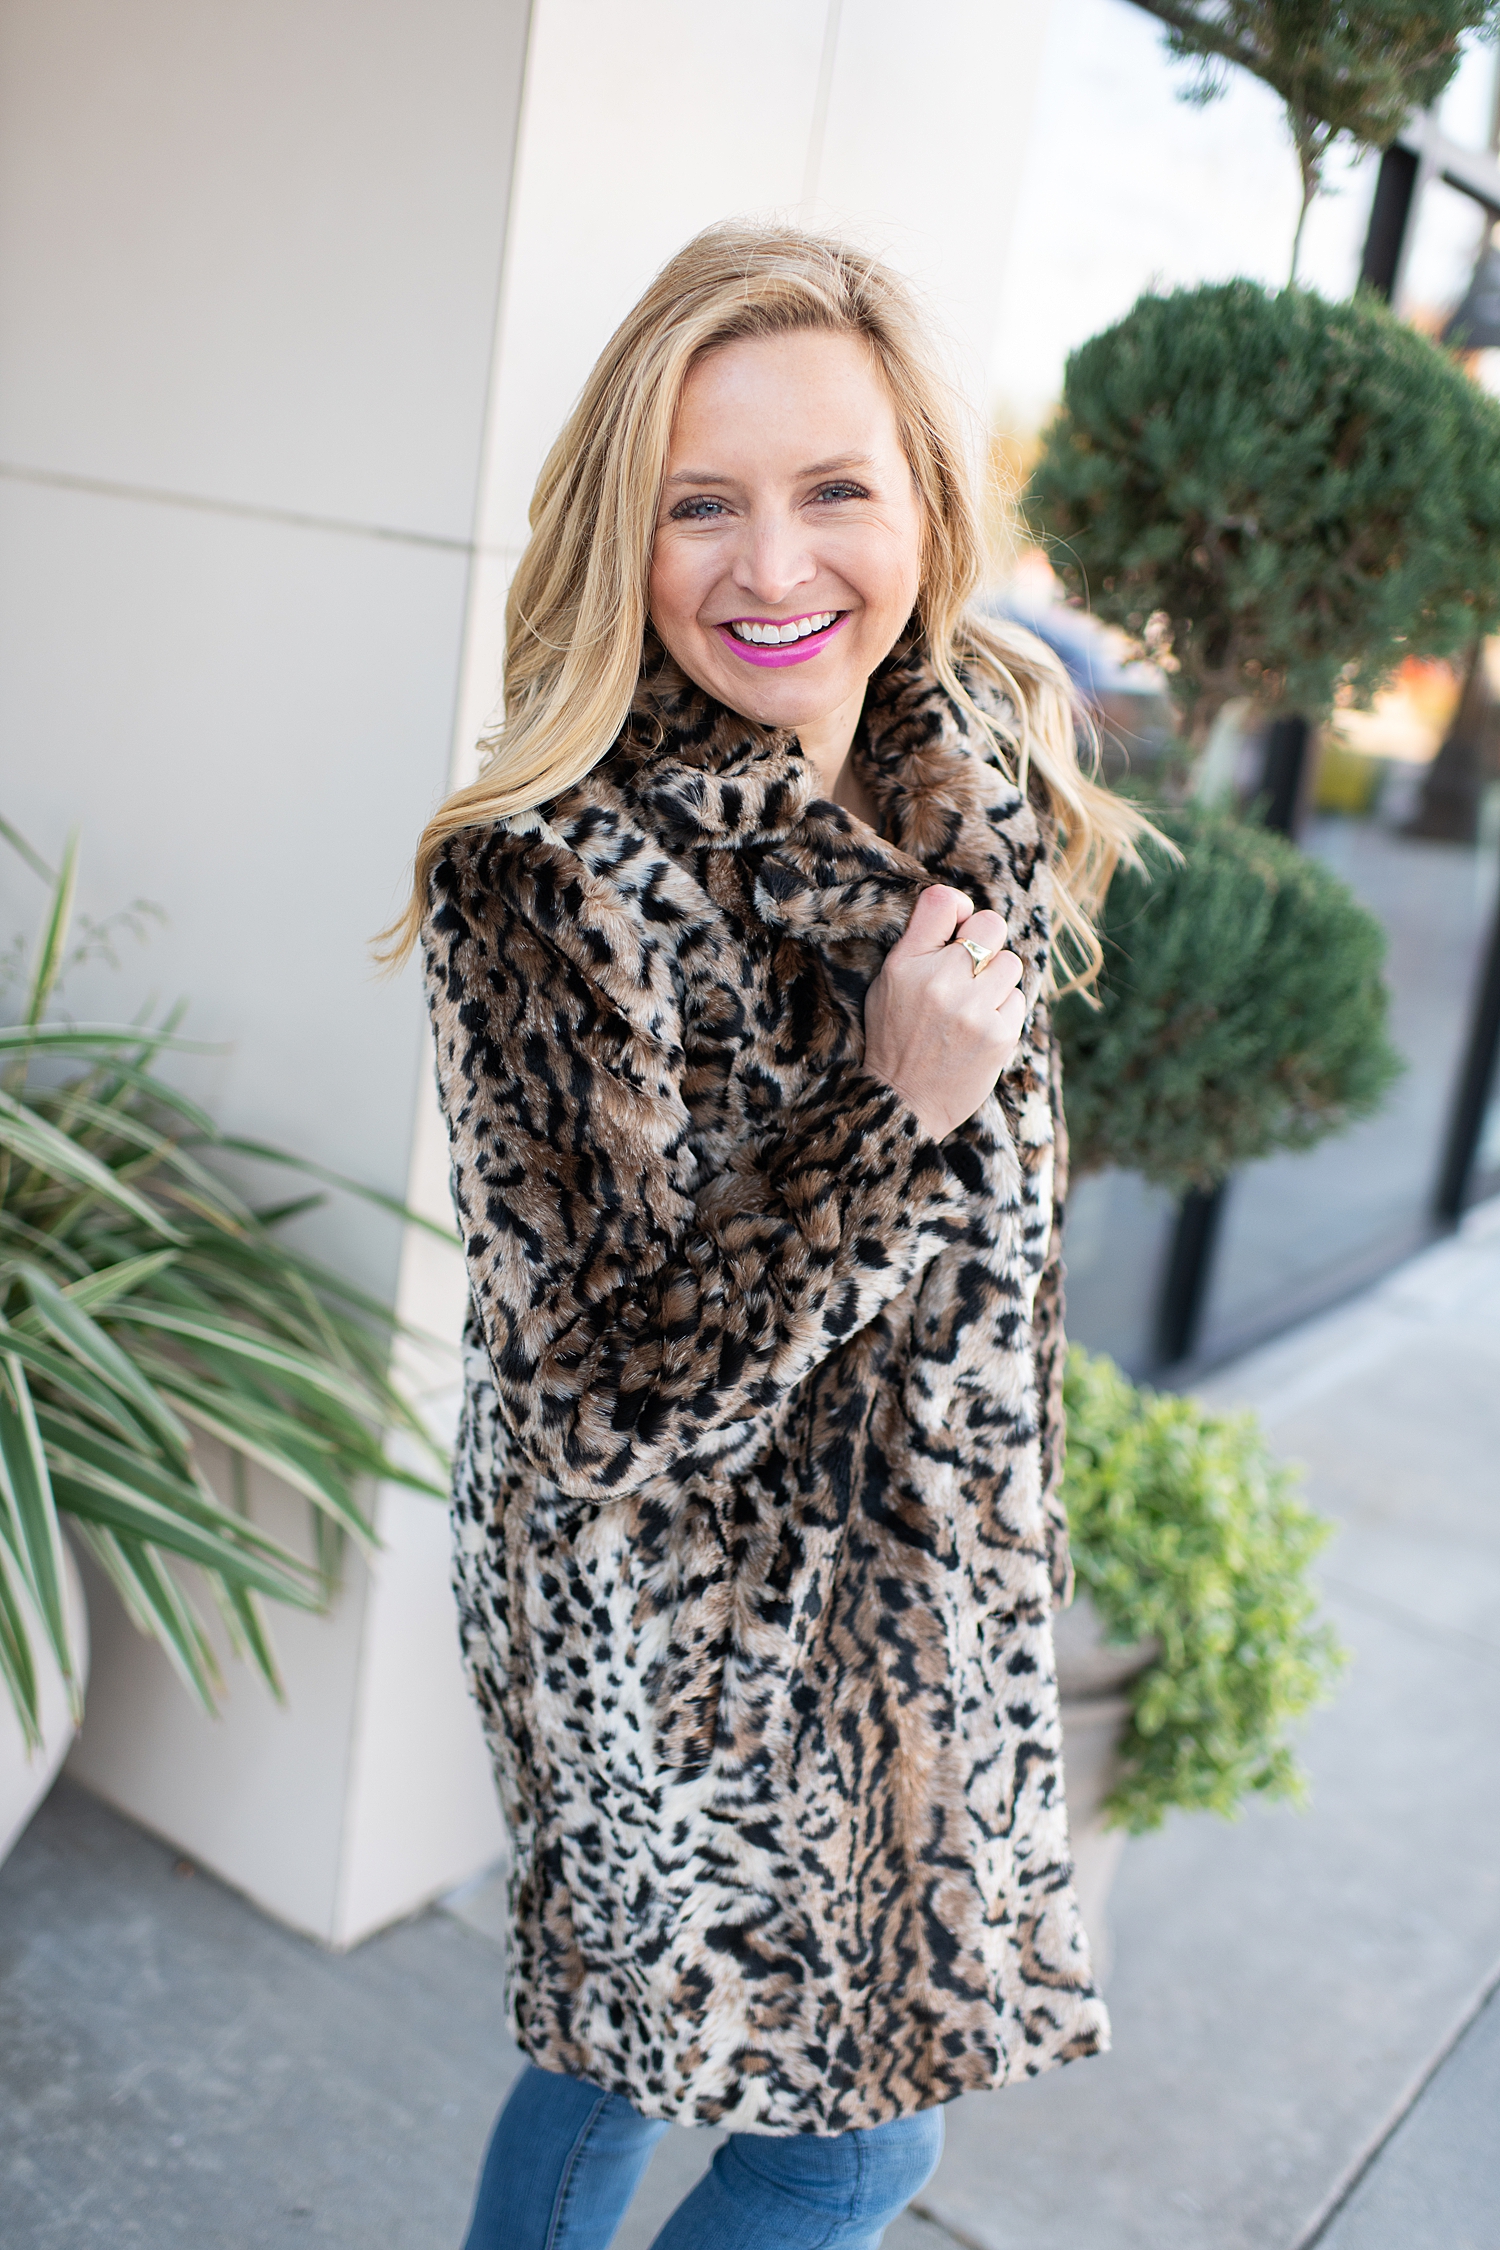 Fancy Ashley x Social Threads collection featured by top Houston fashion blogger, Fancy Ashley: image of a woman wearing a Social Threads leopard faux fur coat, Social Threads skinny jeans, and Golden Goose sneakers